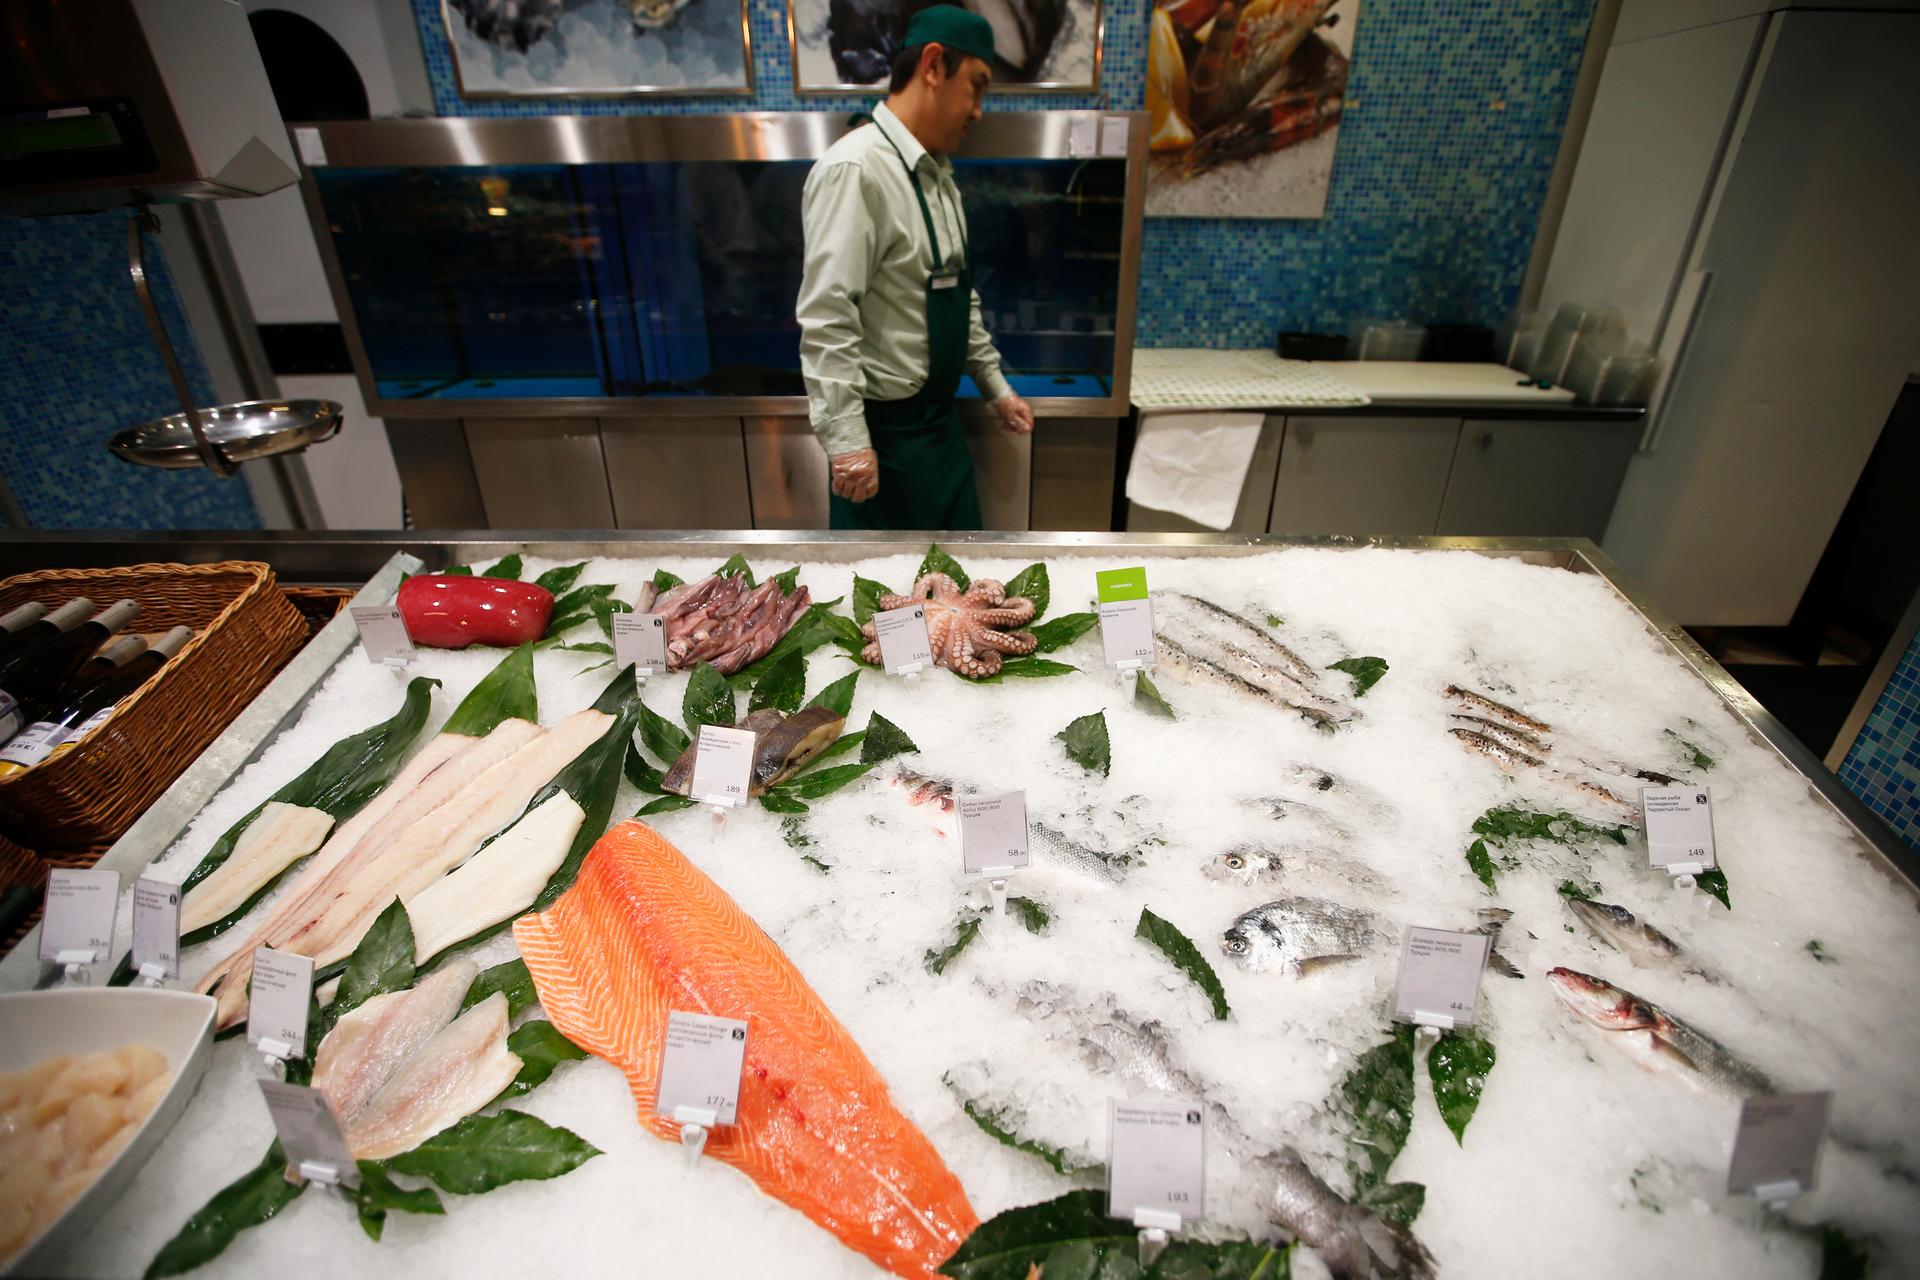 Fish and seafood are displayed for sale at a grocery store in Moscow. Embargoes mean that Russia's usual sources of fish have been replaced by food from other areas, and Russians aren't happy with the new options. 